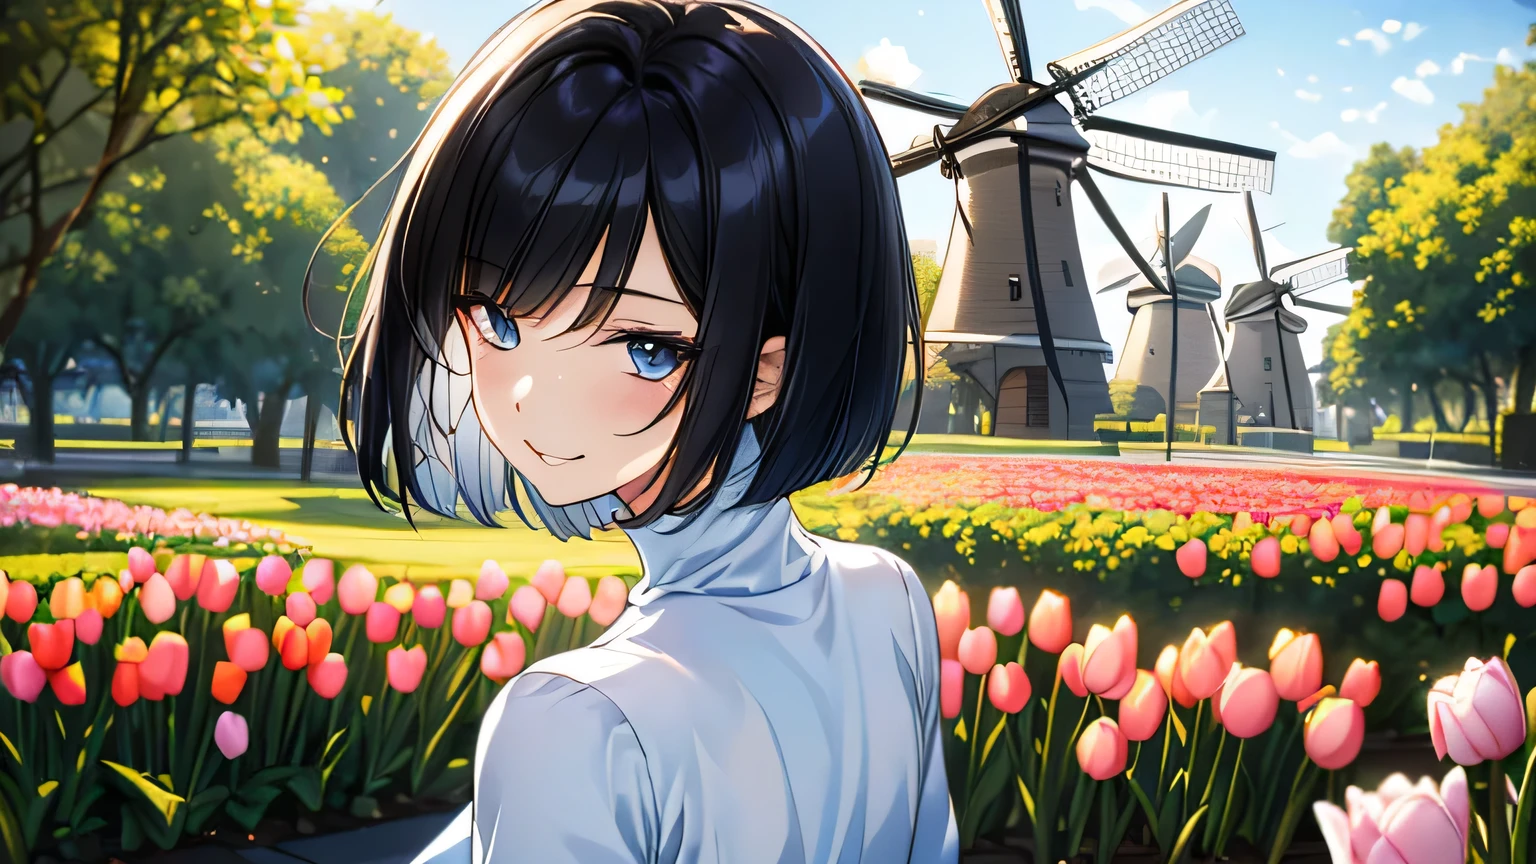 1 female、28 years old、美New髪, black hair、shortcut、bob cut、Rin々New、slanted eyes、eyeliner is clear、long face、big smile、small bust、Street in a park with windmills and tulips in the Netherlands、1 femaleで歩いている、The screen shows her from the chest up..、Slim and slender body shape、Rear view、light blue long sleeve turtleneck、the viewer sees her from behind、She stares at the viewer、